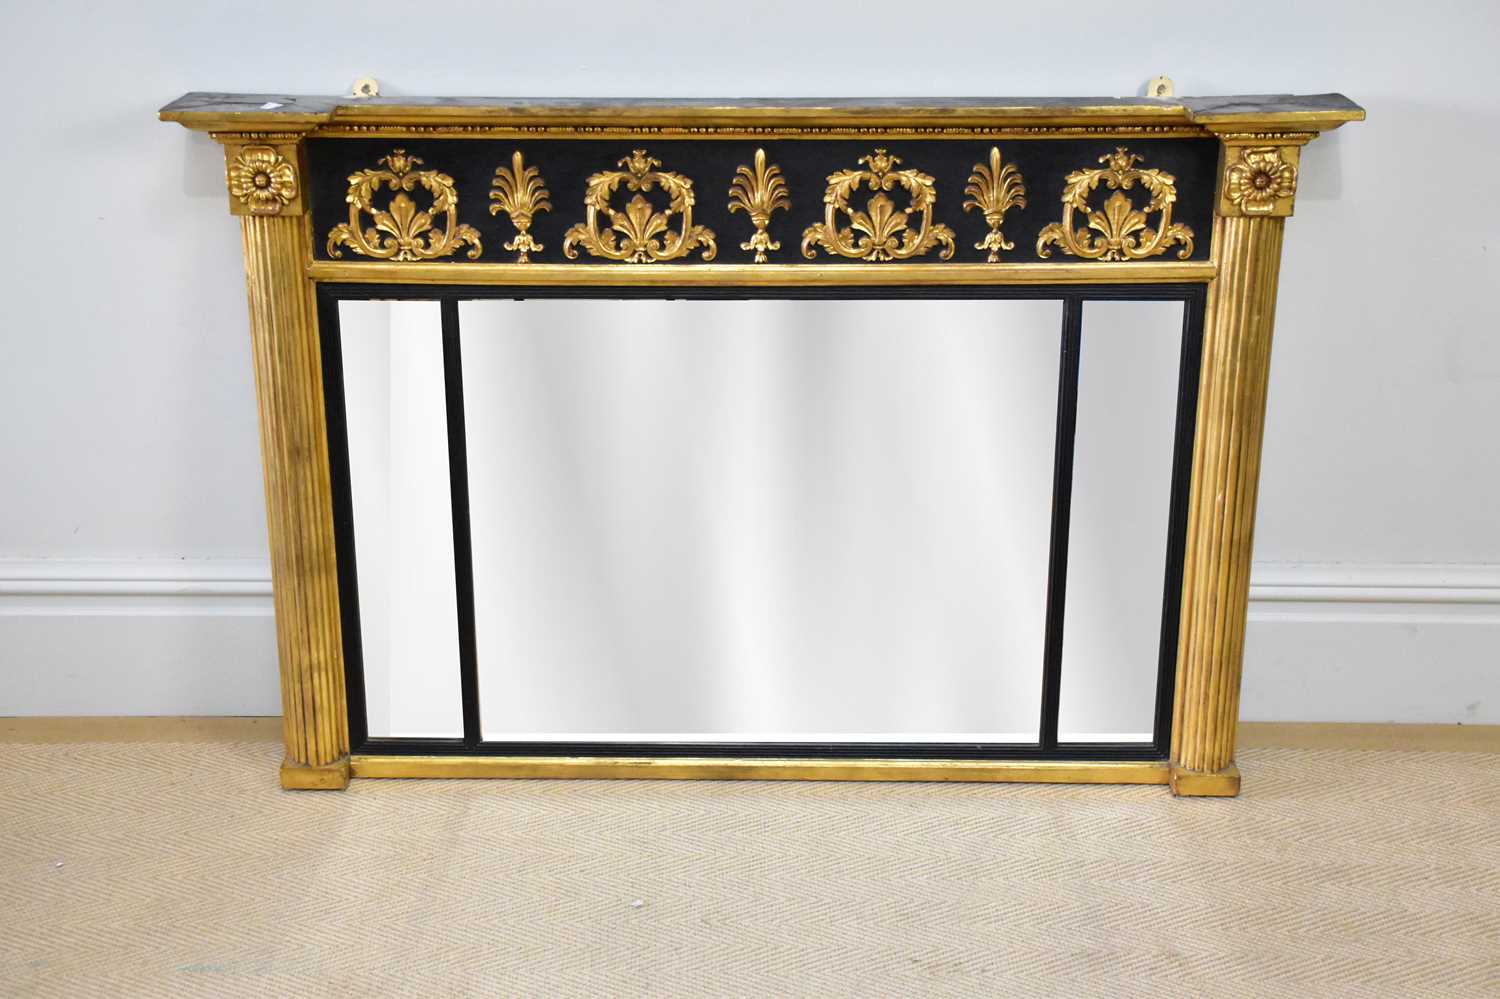 A 19th century gilt wood and gesso overmantel mirror, height 81cm, width 123cm. Provenance: